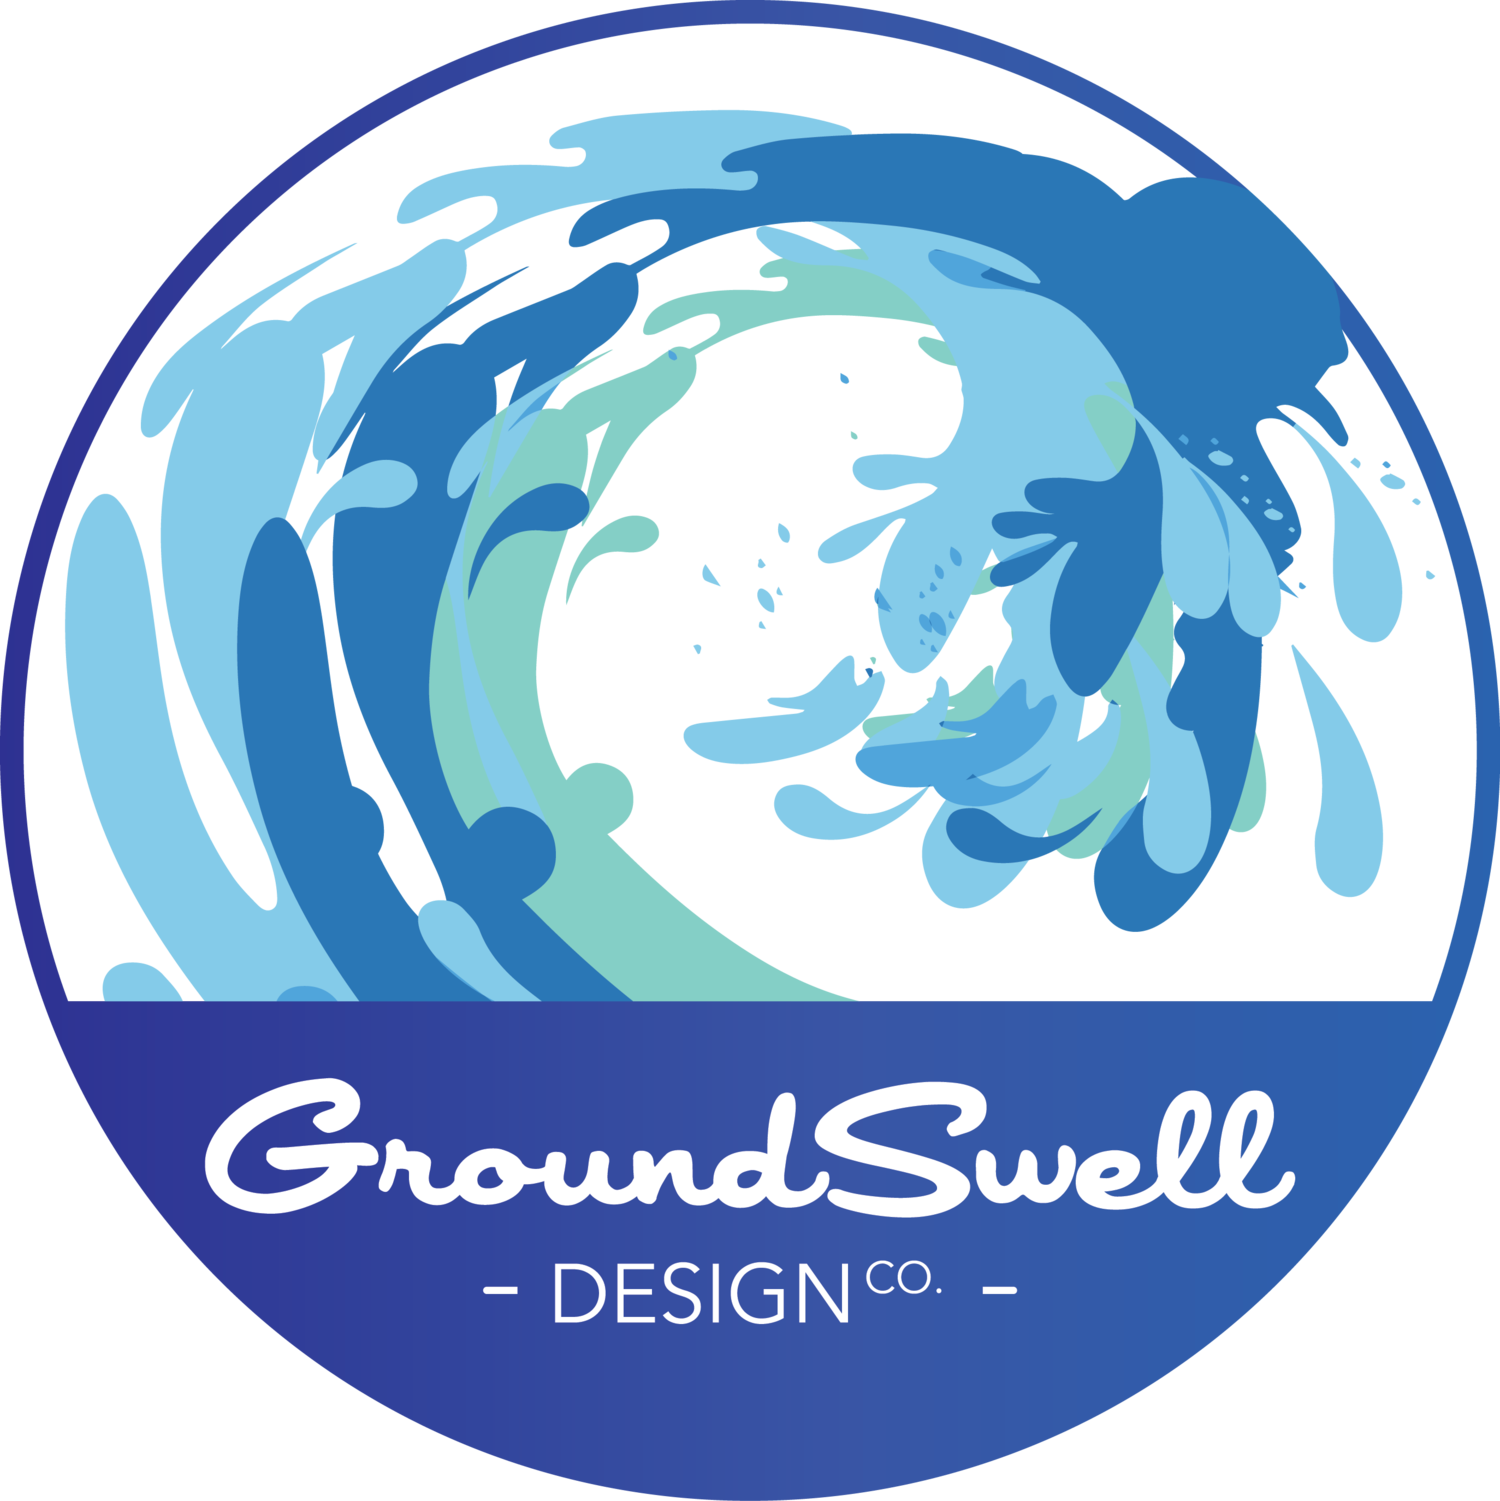 GroundSwell Design Co